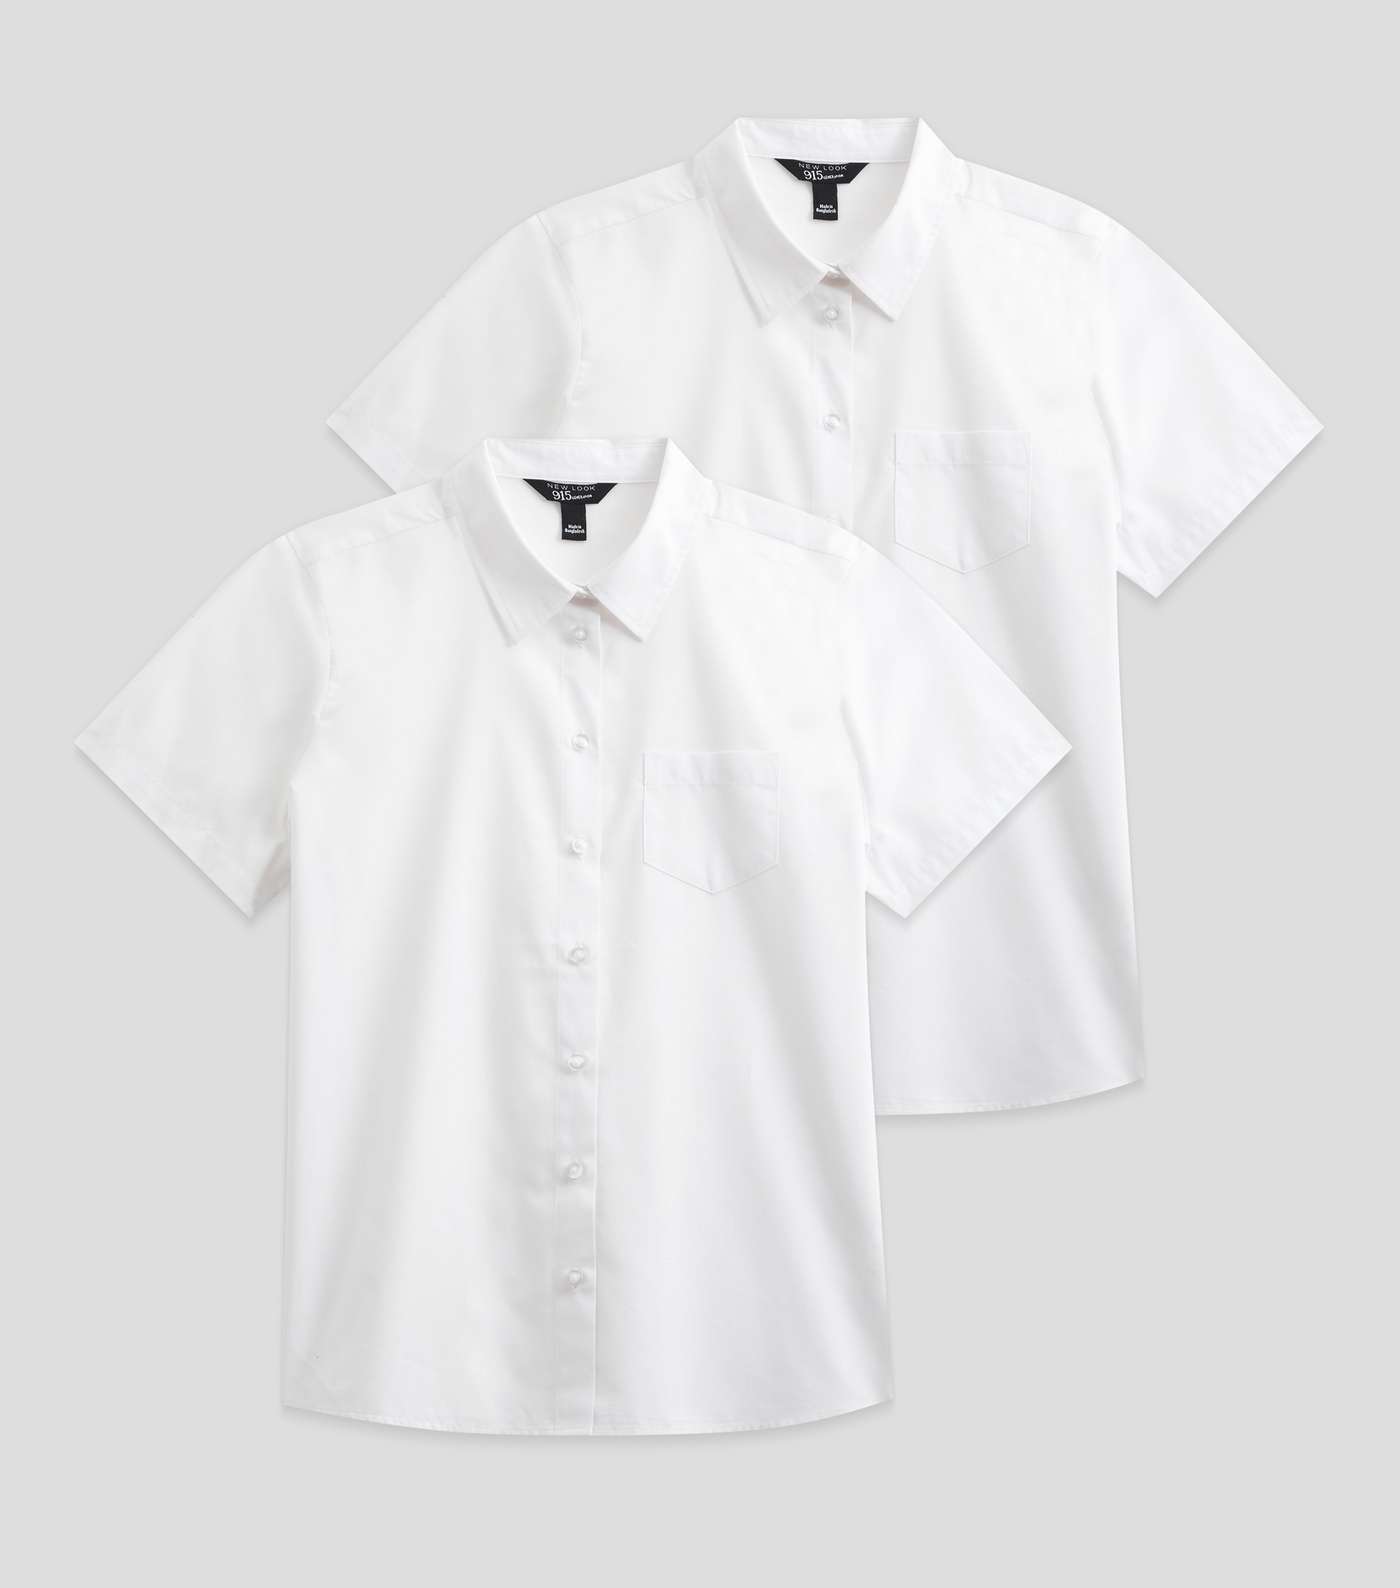 Girls 2 Pack White Generous Fit Easy Care School Shirts Image 5